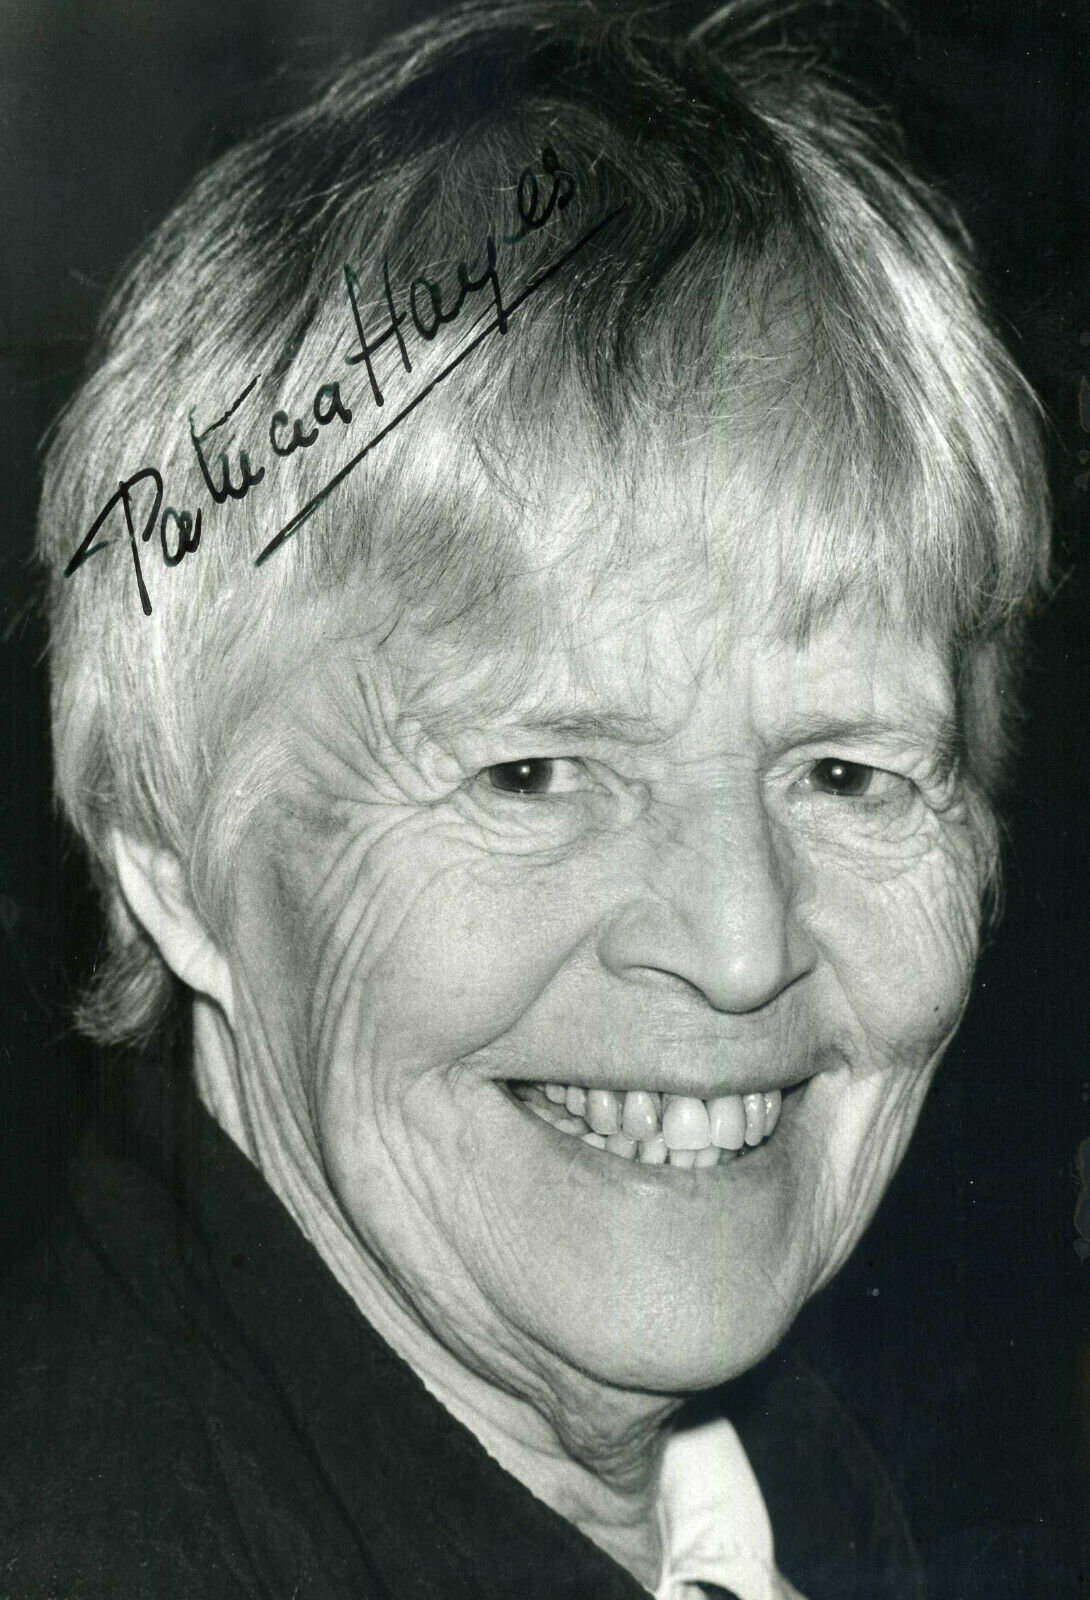 PATRICIA HAYES Signed Photo Poster paintinggraph - Film & TV Actress - reprint